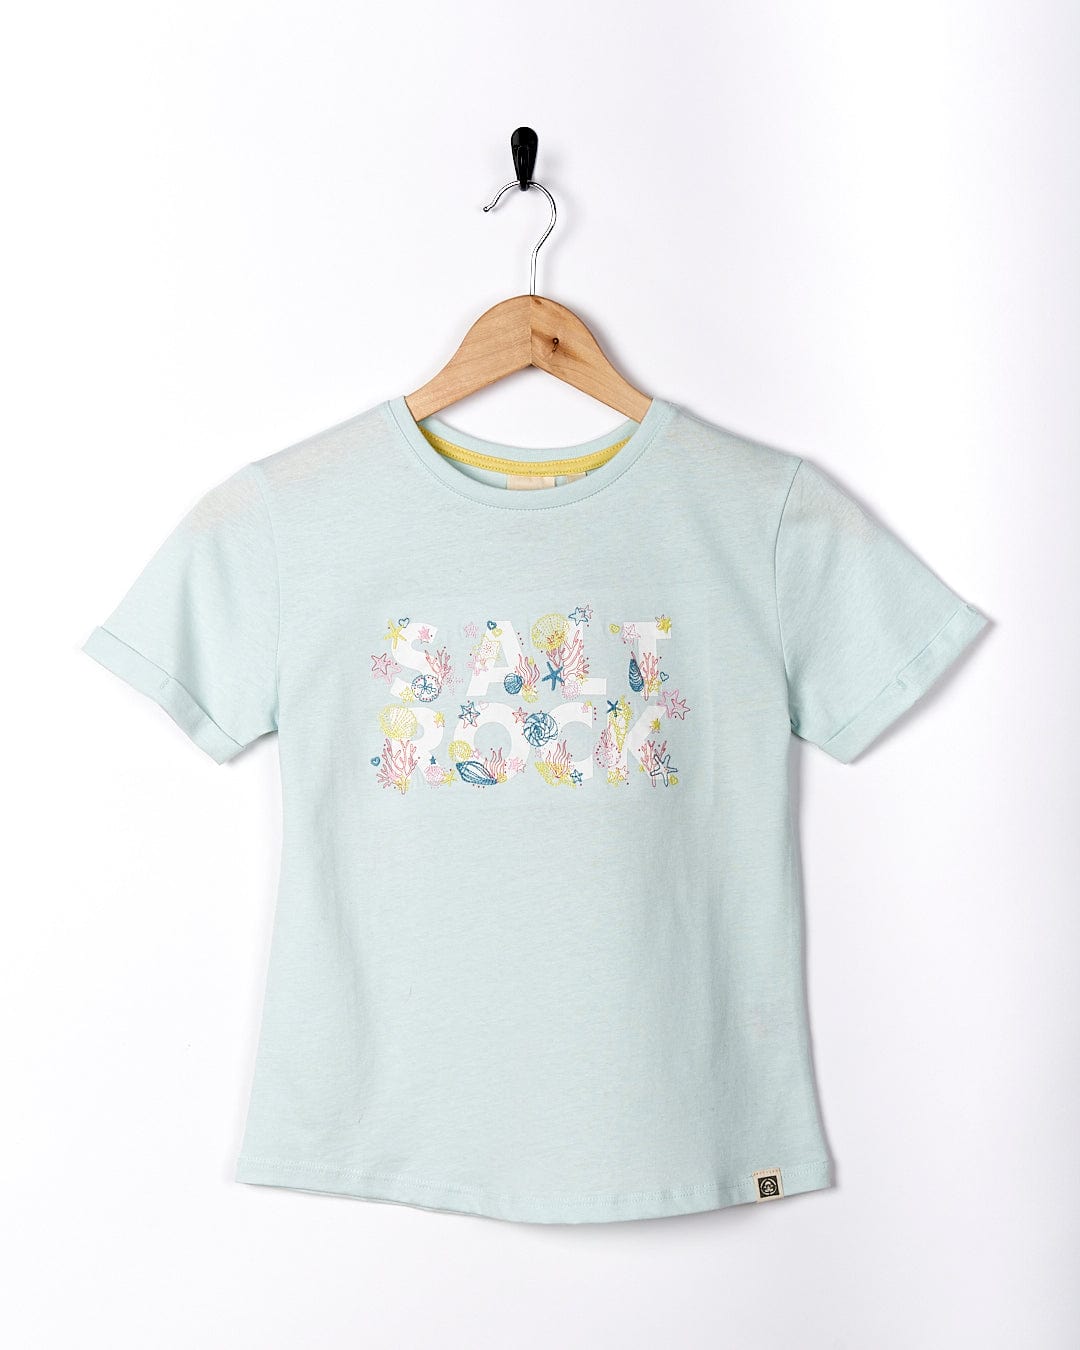 A Saltrock Seabed - Kids Short Sleeve T-Shirt - Light Blue with flowers on it.